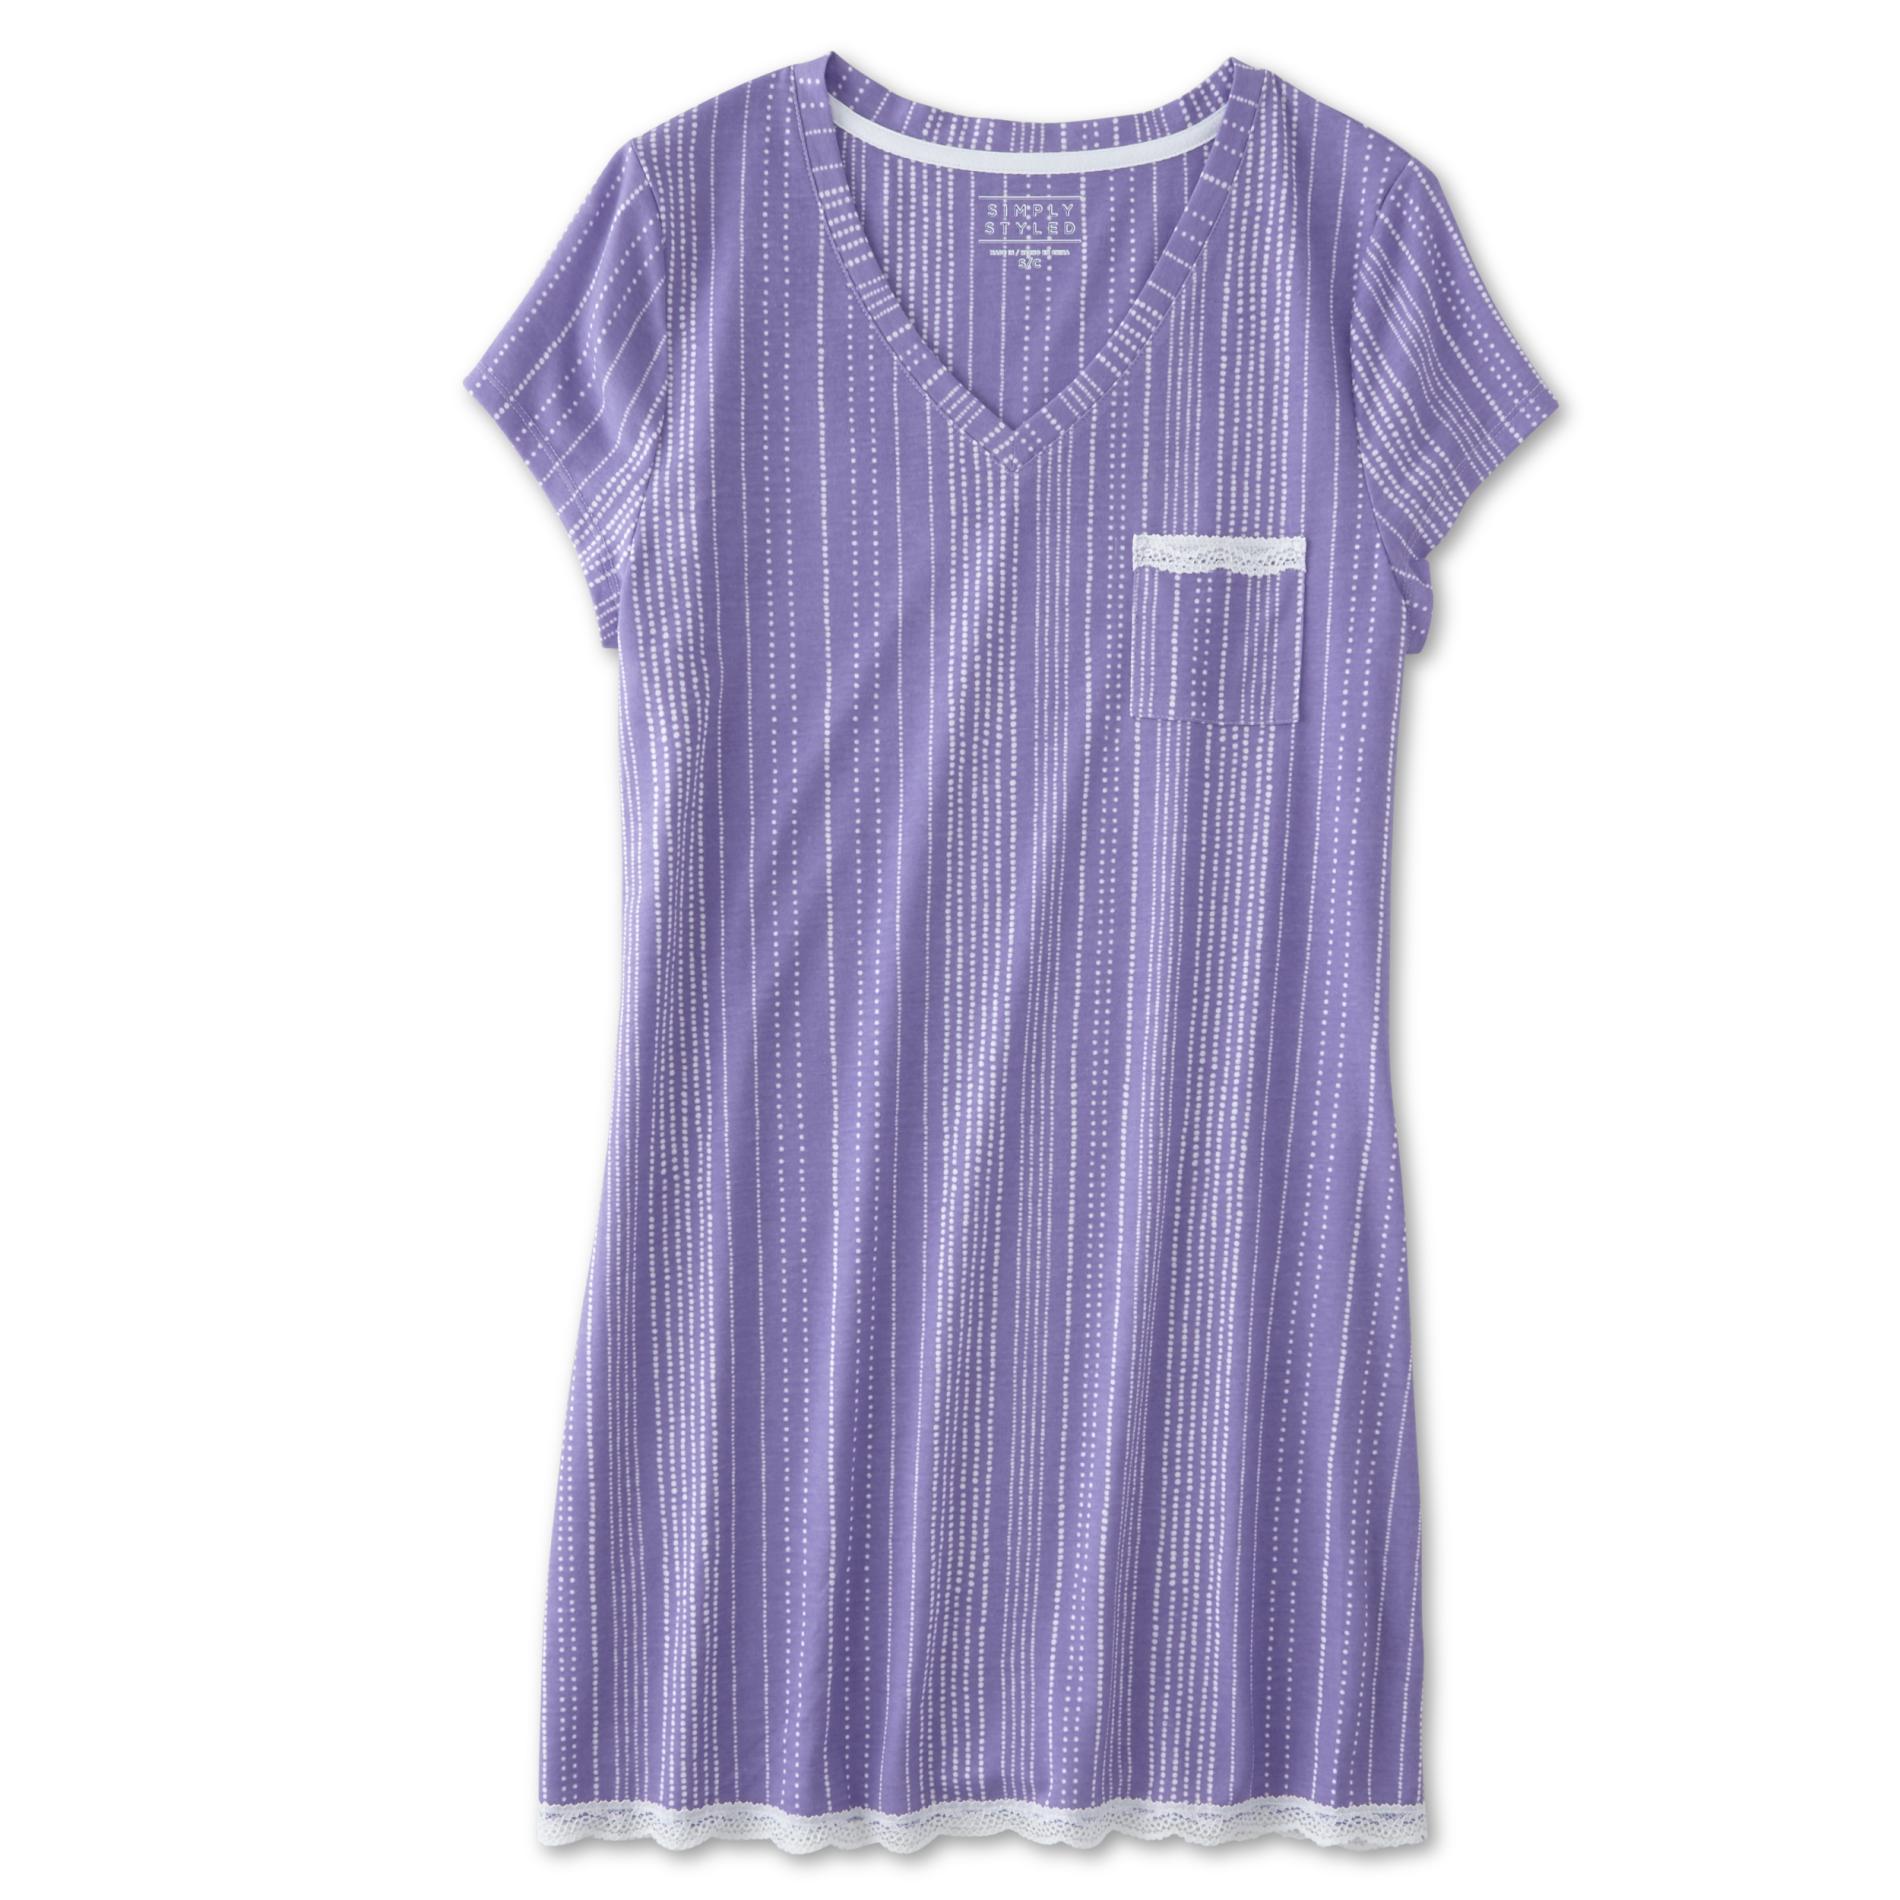 Simply Styled Women's Nightgown - Striped